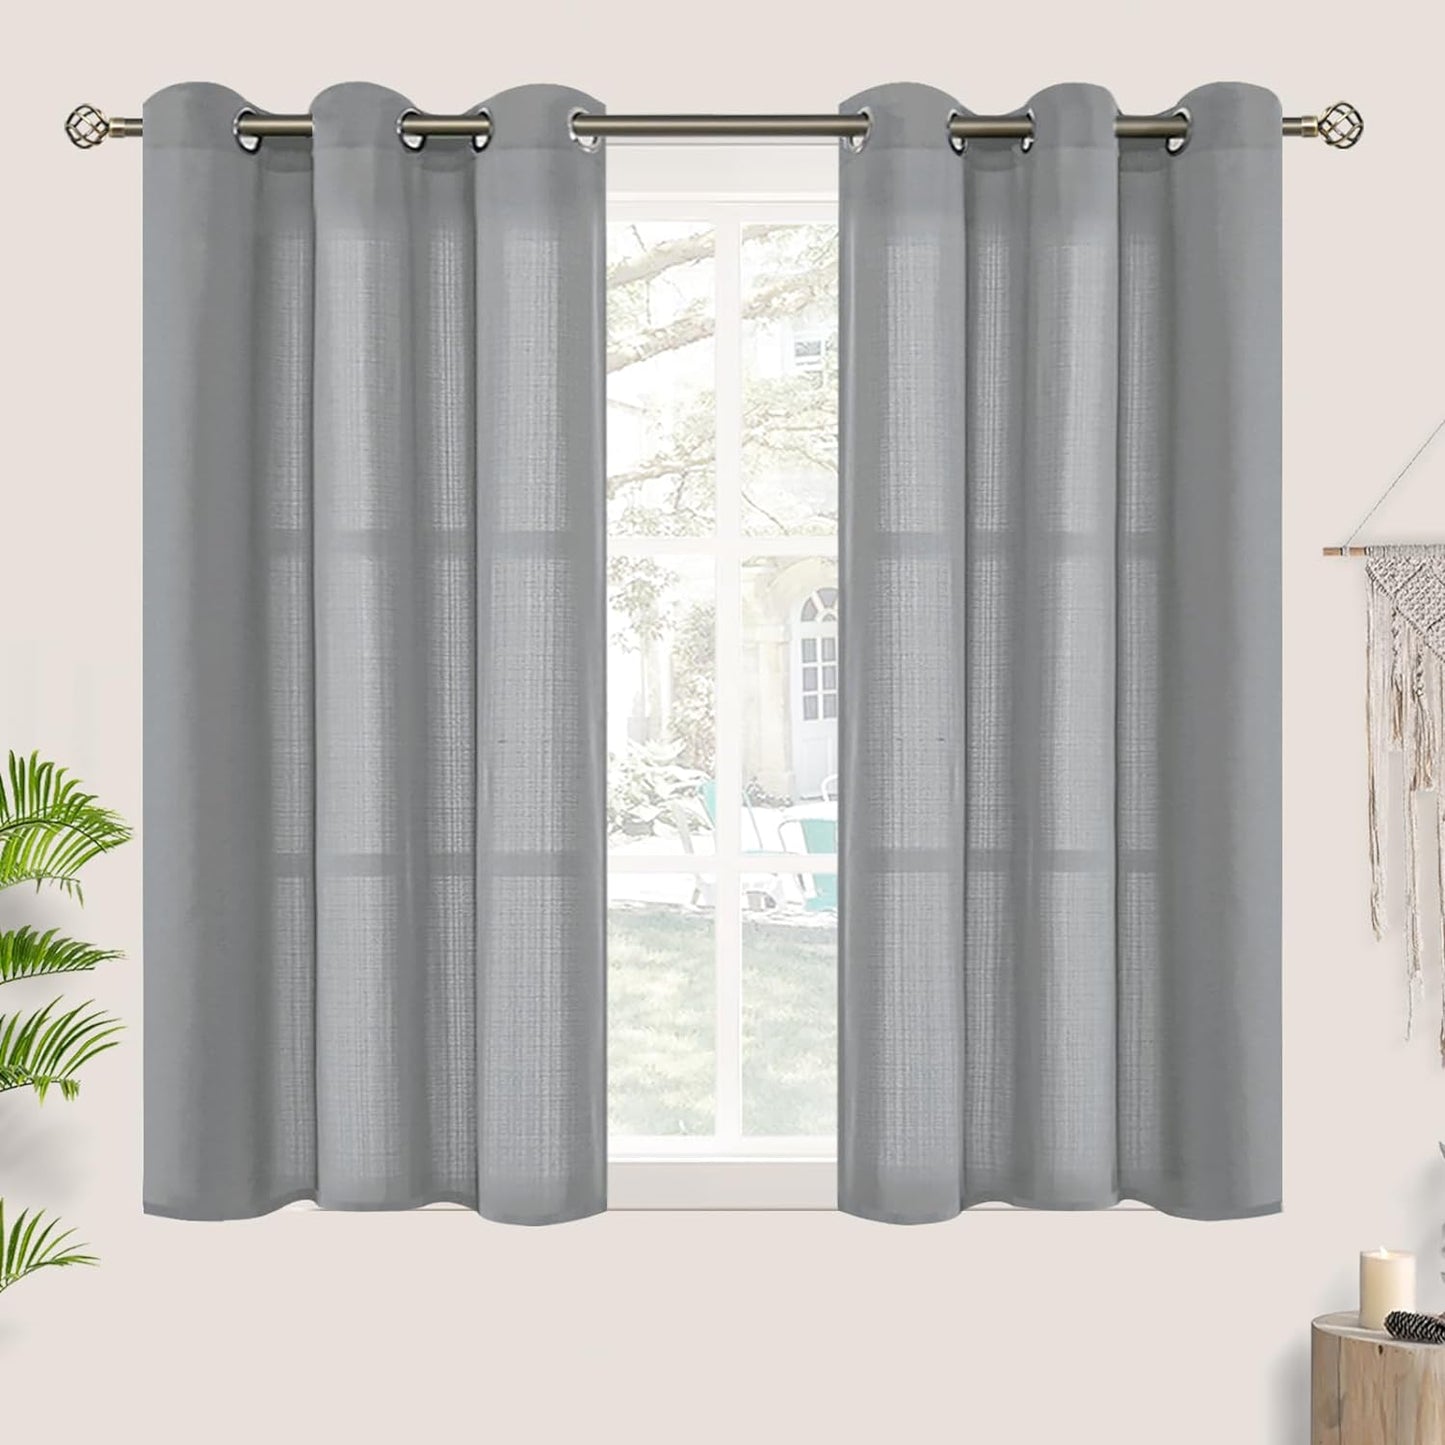 Bgment Natural Linen Look Semi Sheer Curtains for Bedroom, 52 X 54 Inch White Grommet Light Filtering Casual Textured Privacy Curtains for Bay Window, 2 Panels  BGment Grey 42W X 45L 